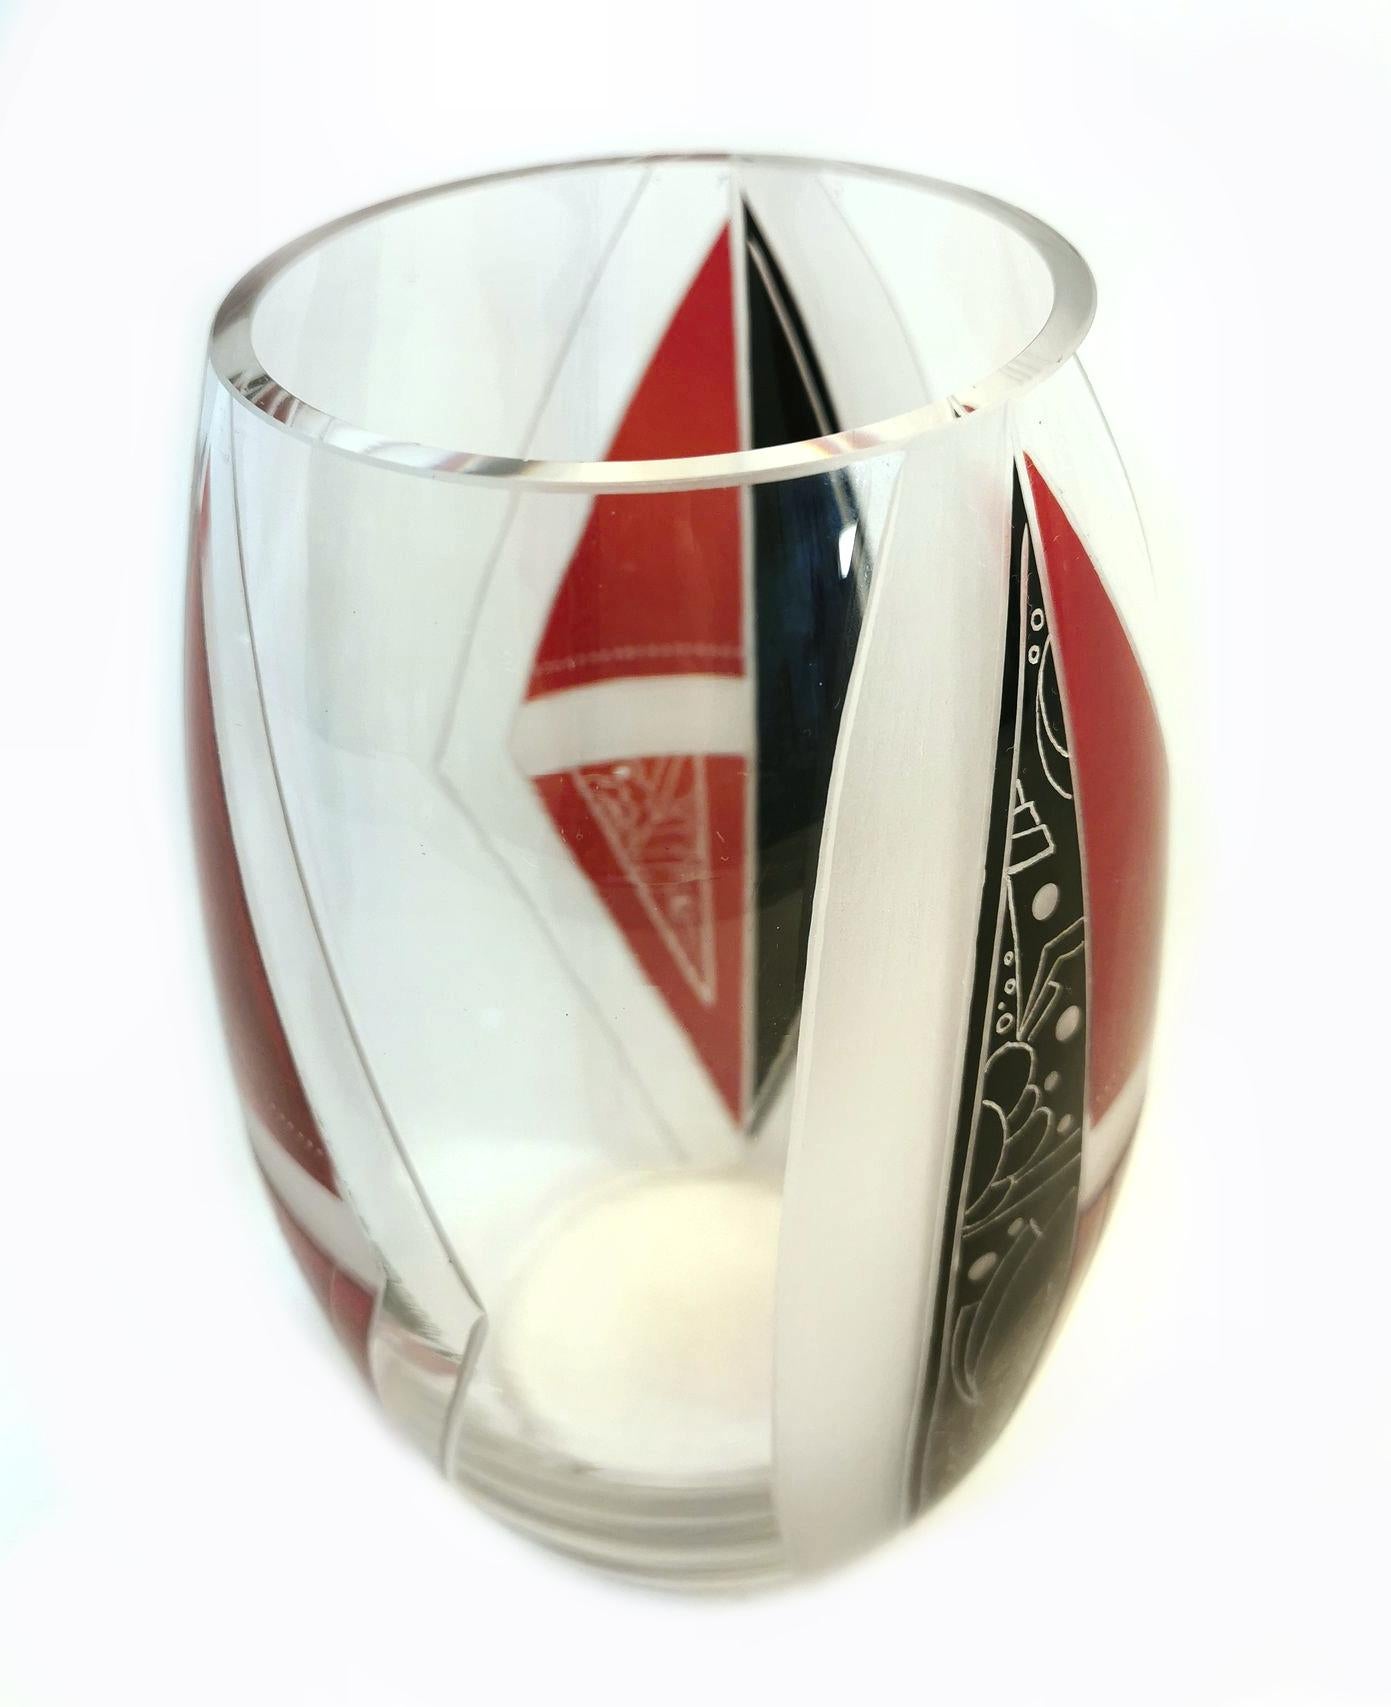 Fabulous Art Deco glass vase with super geometric enamel decoration, a wonderful piece for the discerning collector and those who appreciate the essence of style these pieces offer. Deceptively heavy and with vivid black and red enamel decoration